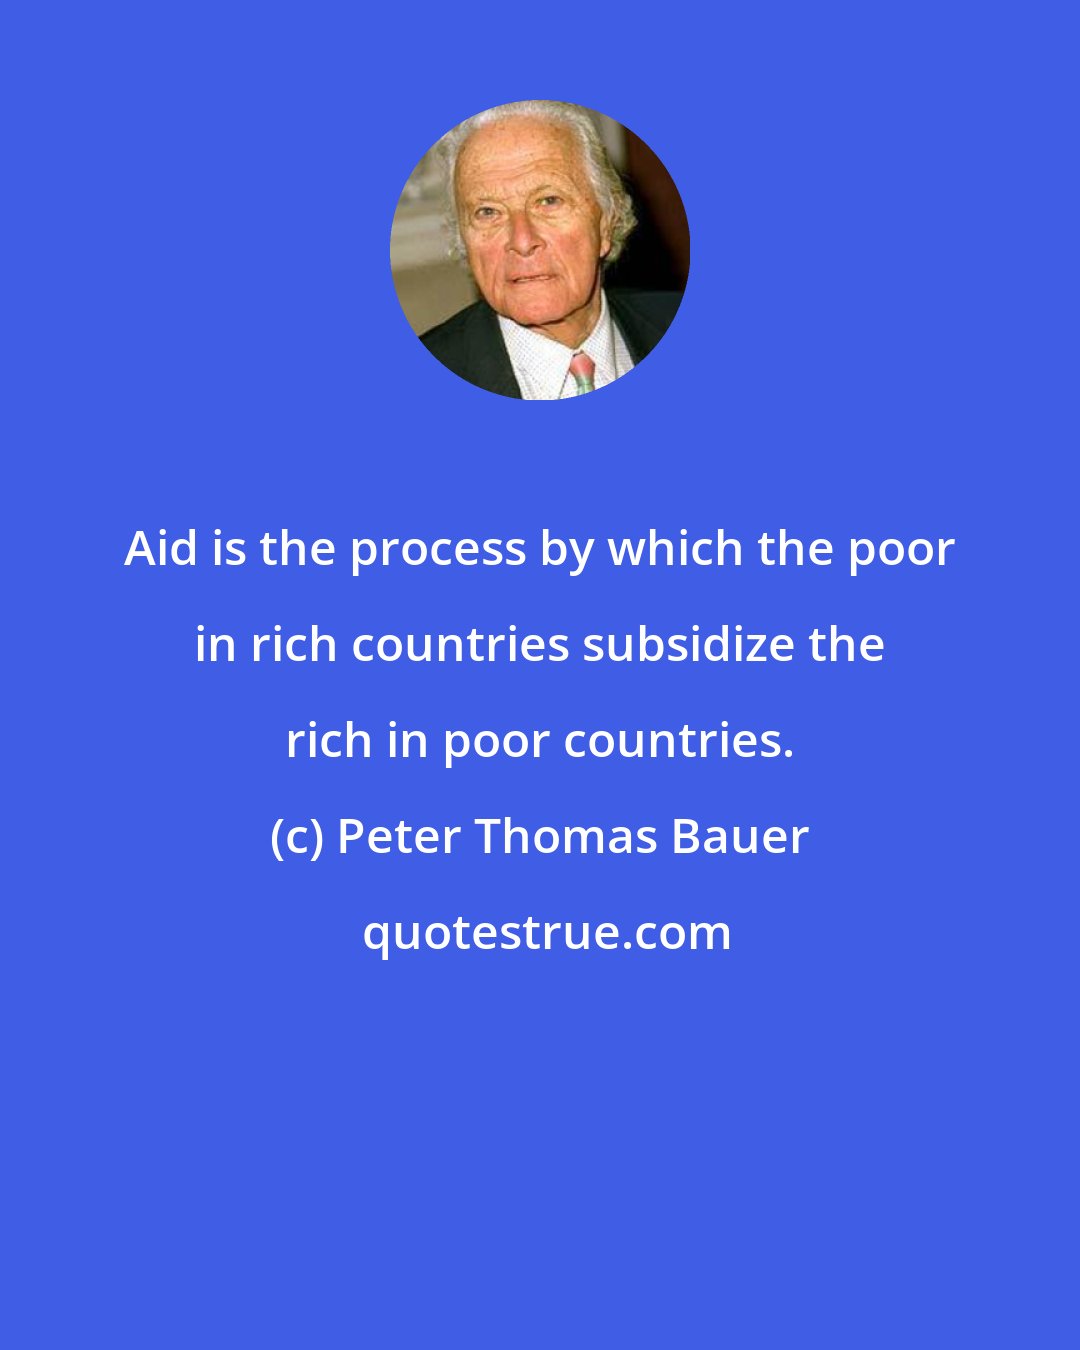 Peter Thomas Bauer: Aid is the process by which the poor in rich countries subsidize the rich in poor countries.